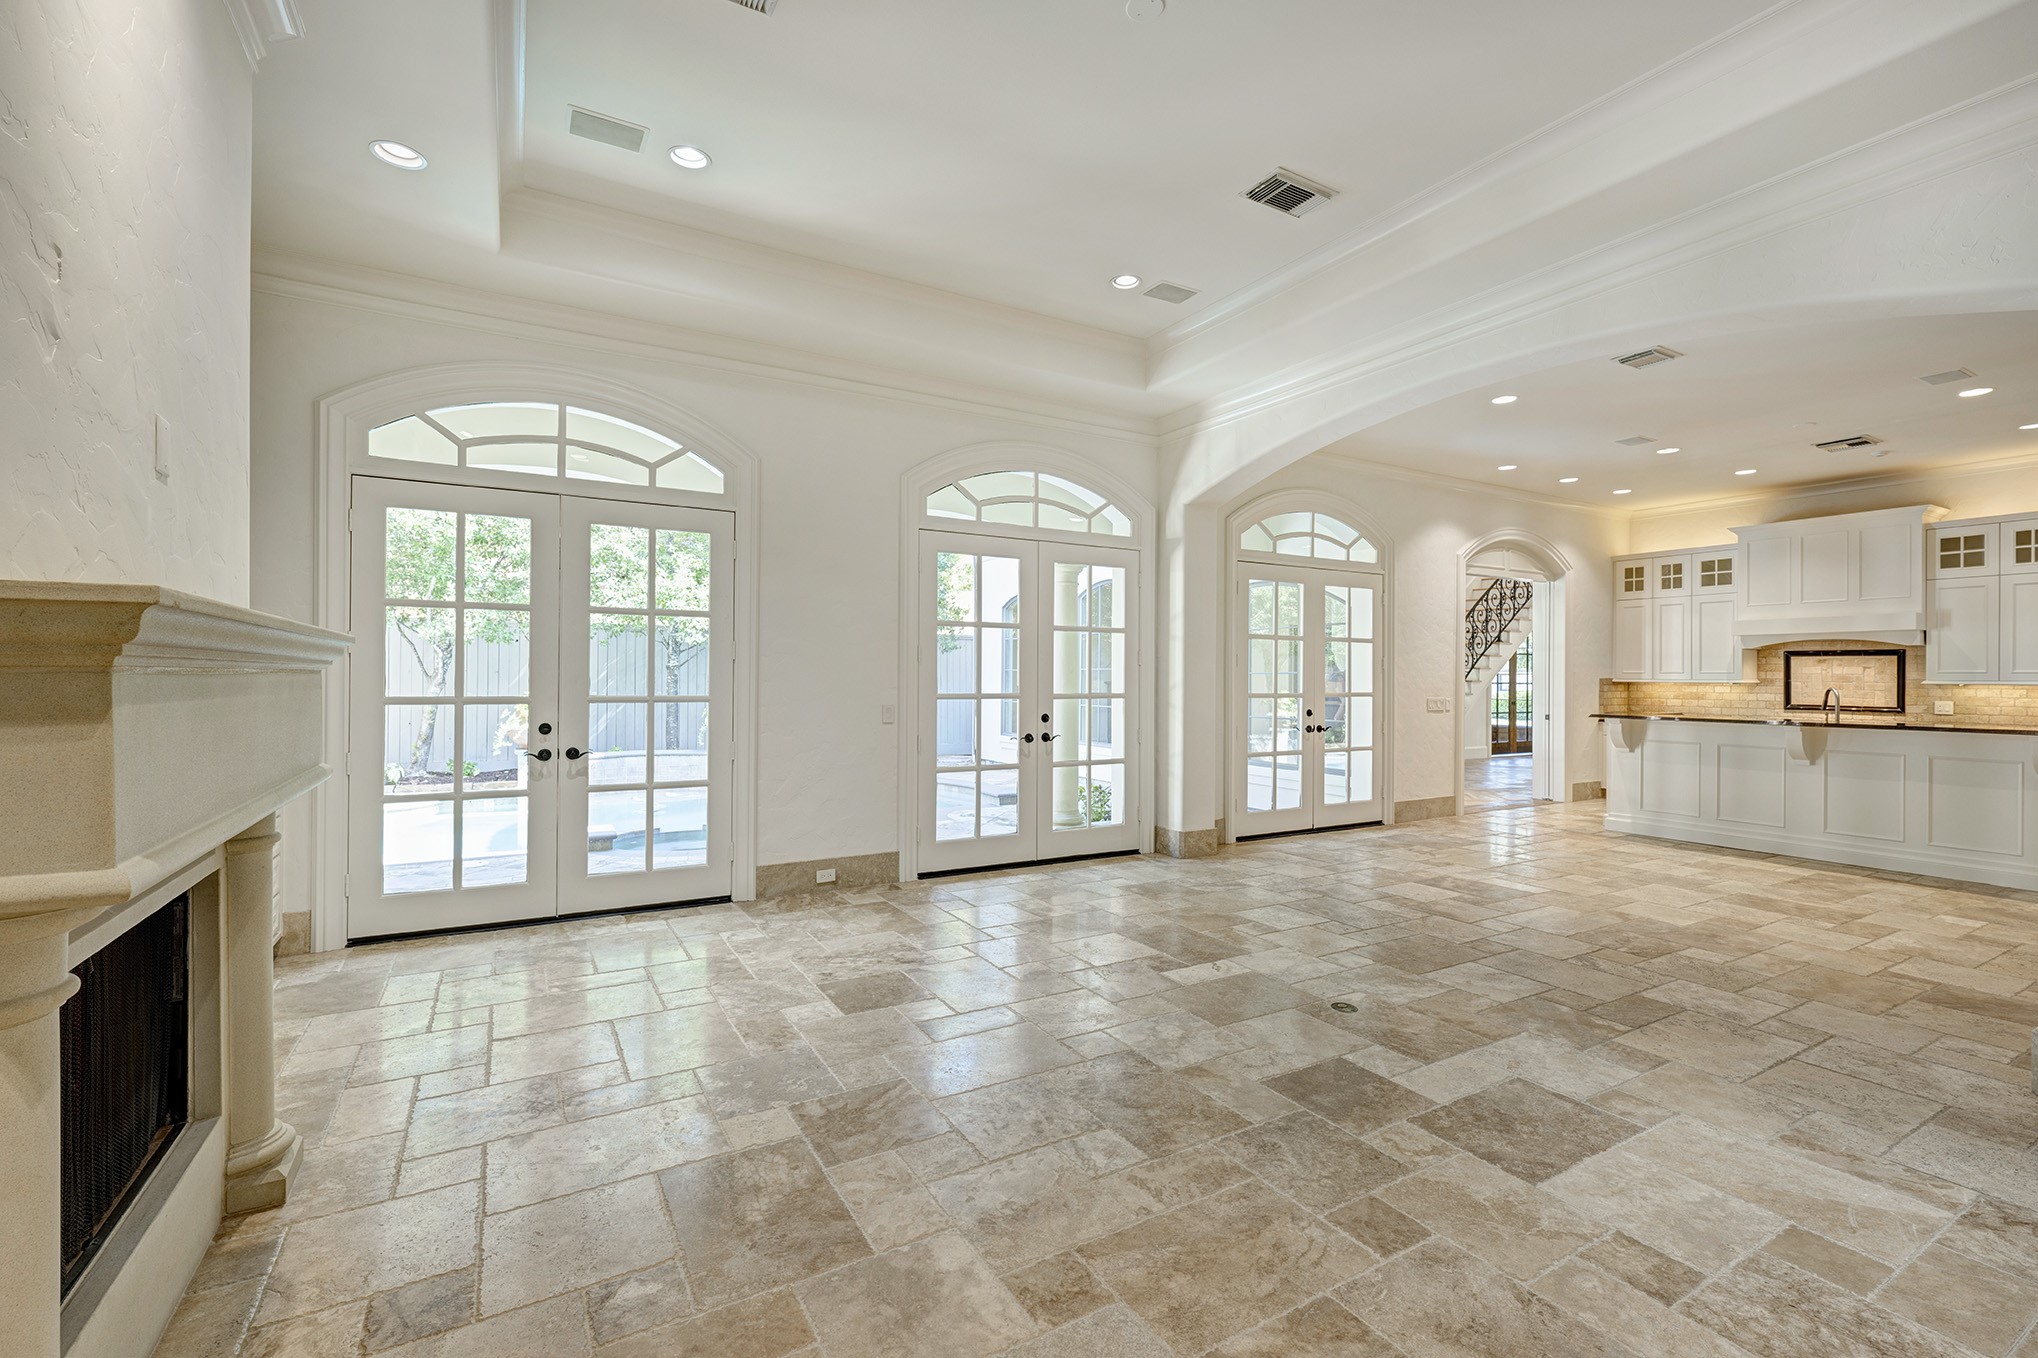 Open concept family room and kitchen with stone floors and wall of french doors that lead to the the backyard oasis.